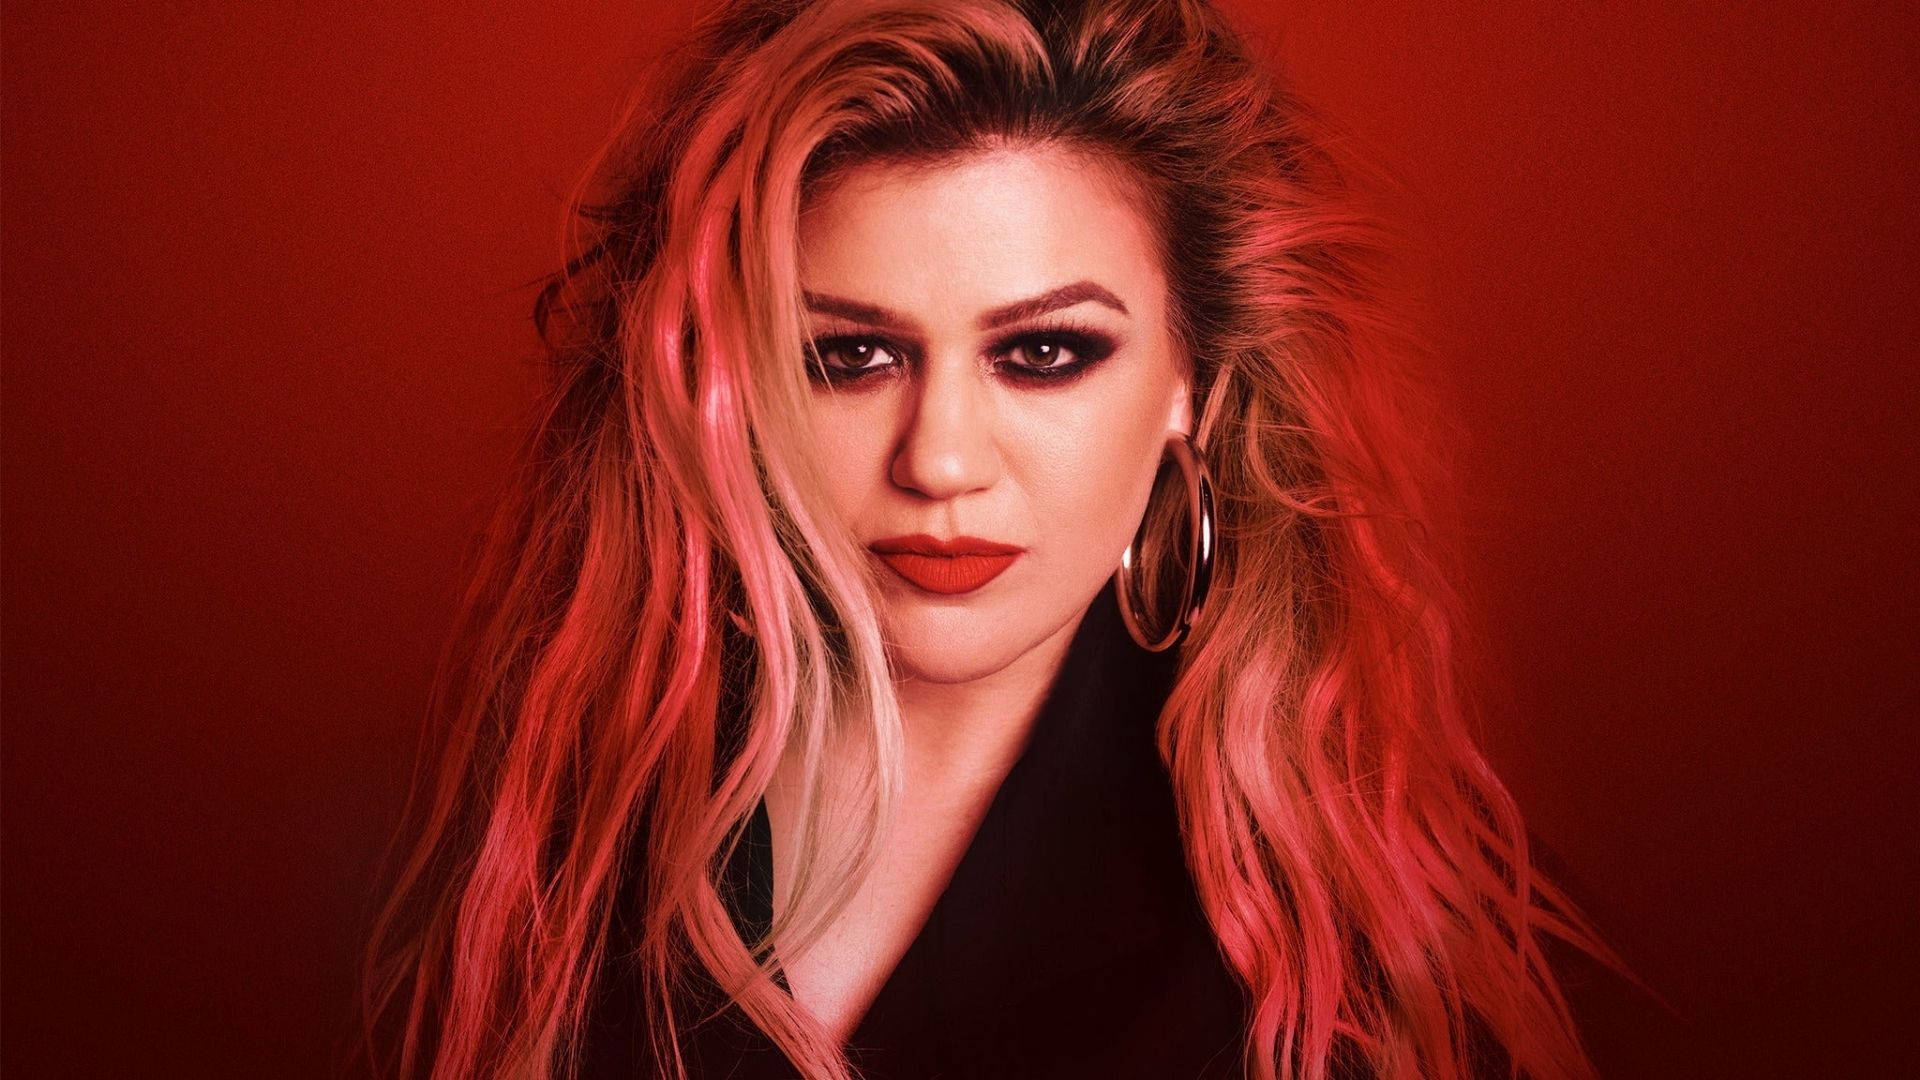 Stunning Portrait Of Kelly Clarkson In Vibrant Red Dress Background